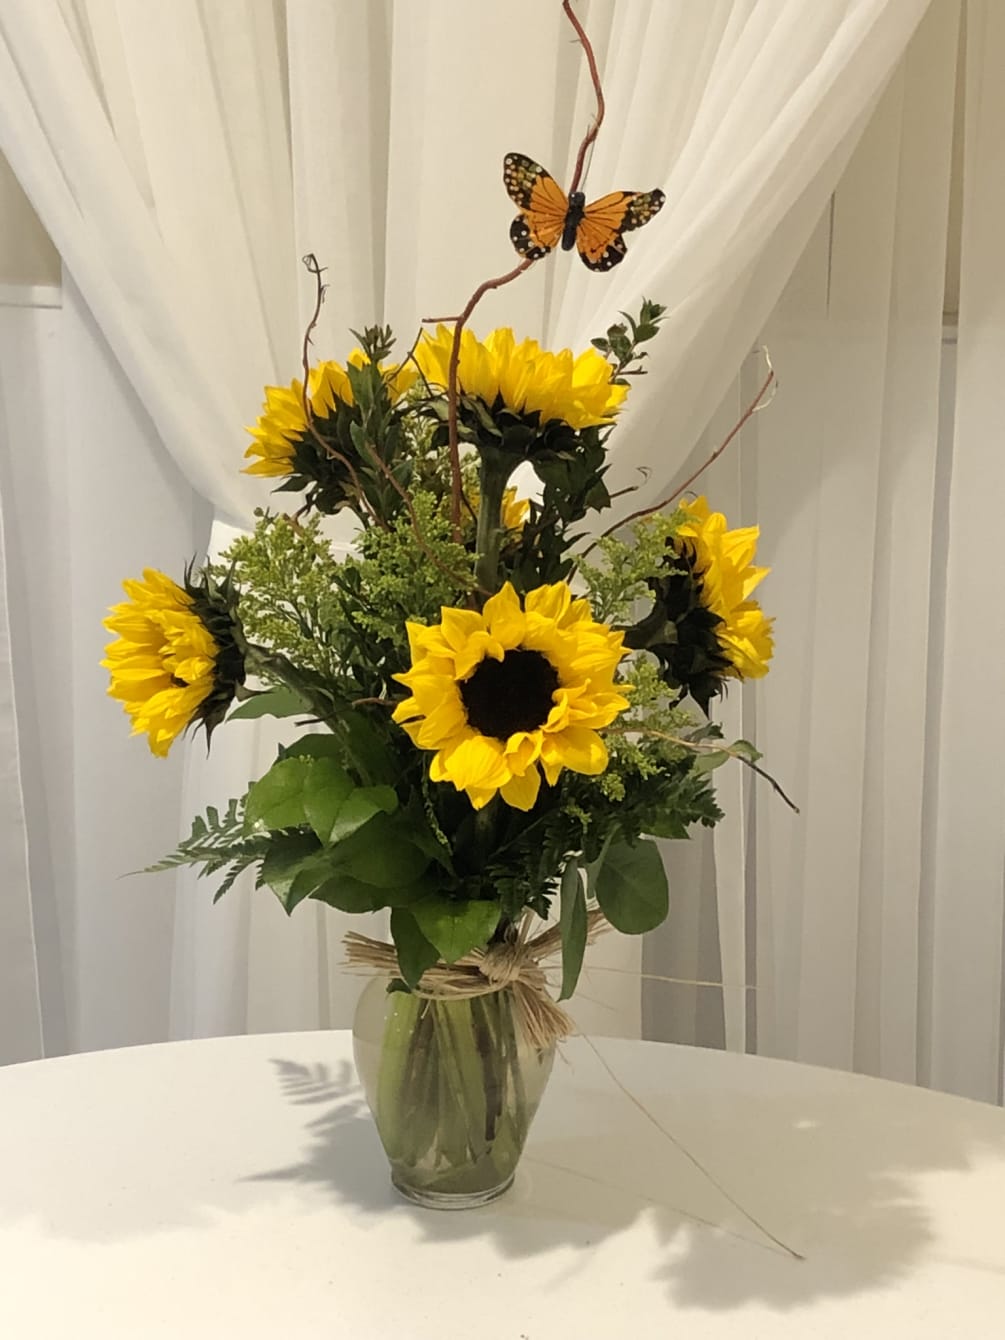 Beautiful large Sunflower Blooms beautifully designed 
With Half Dozen Sunflowers with accent